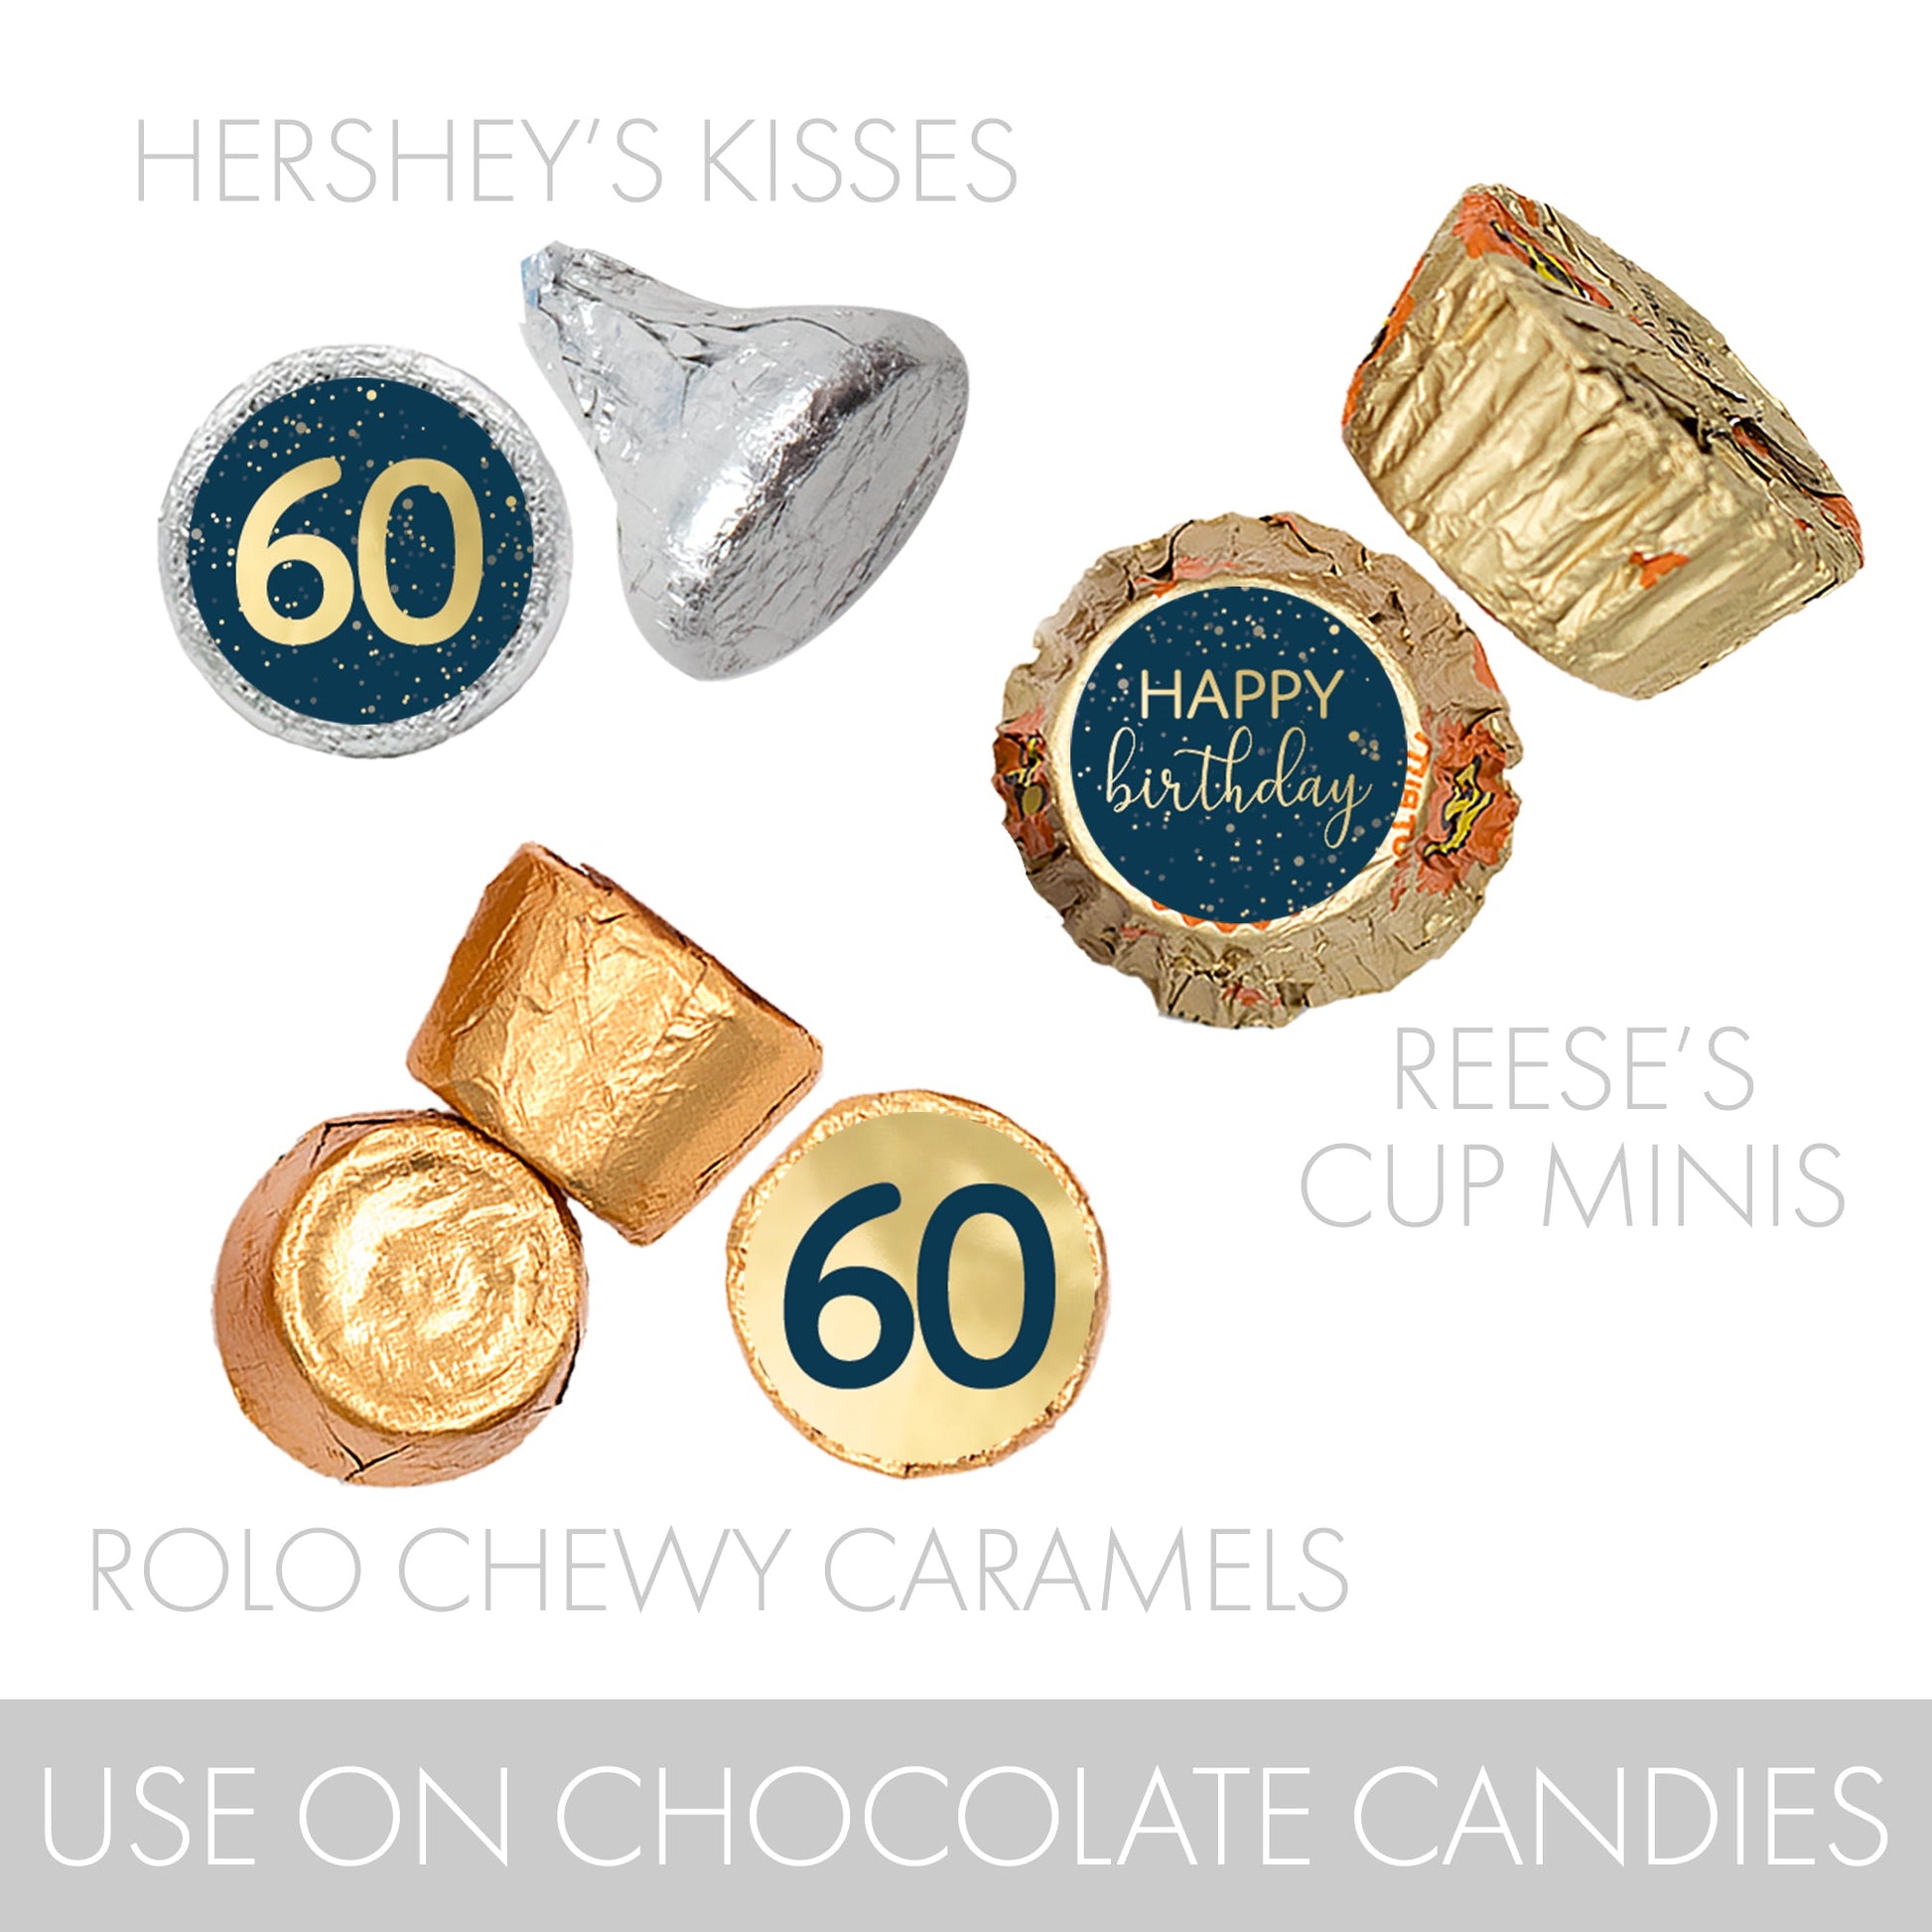 Celebrate your 60th birthday in style with these matching Hersheys Kisses stickers